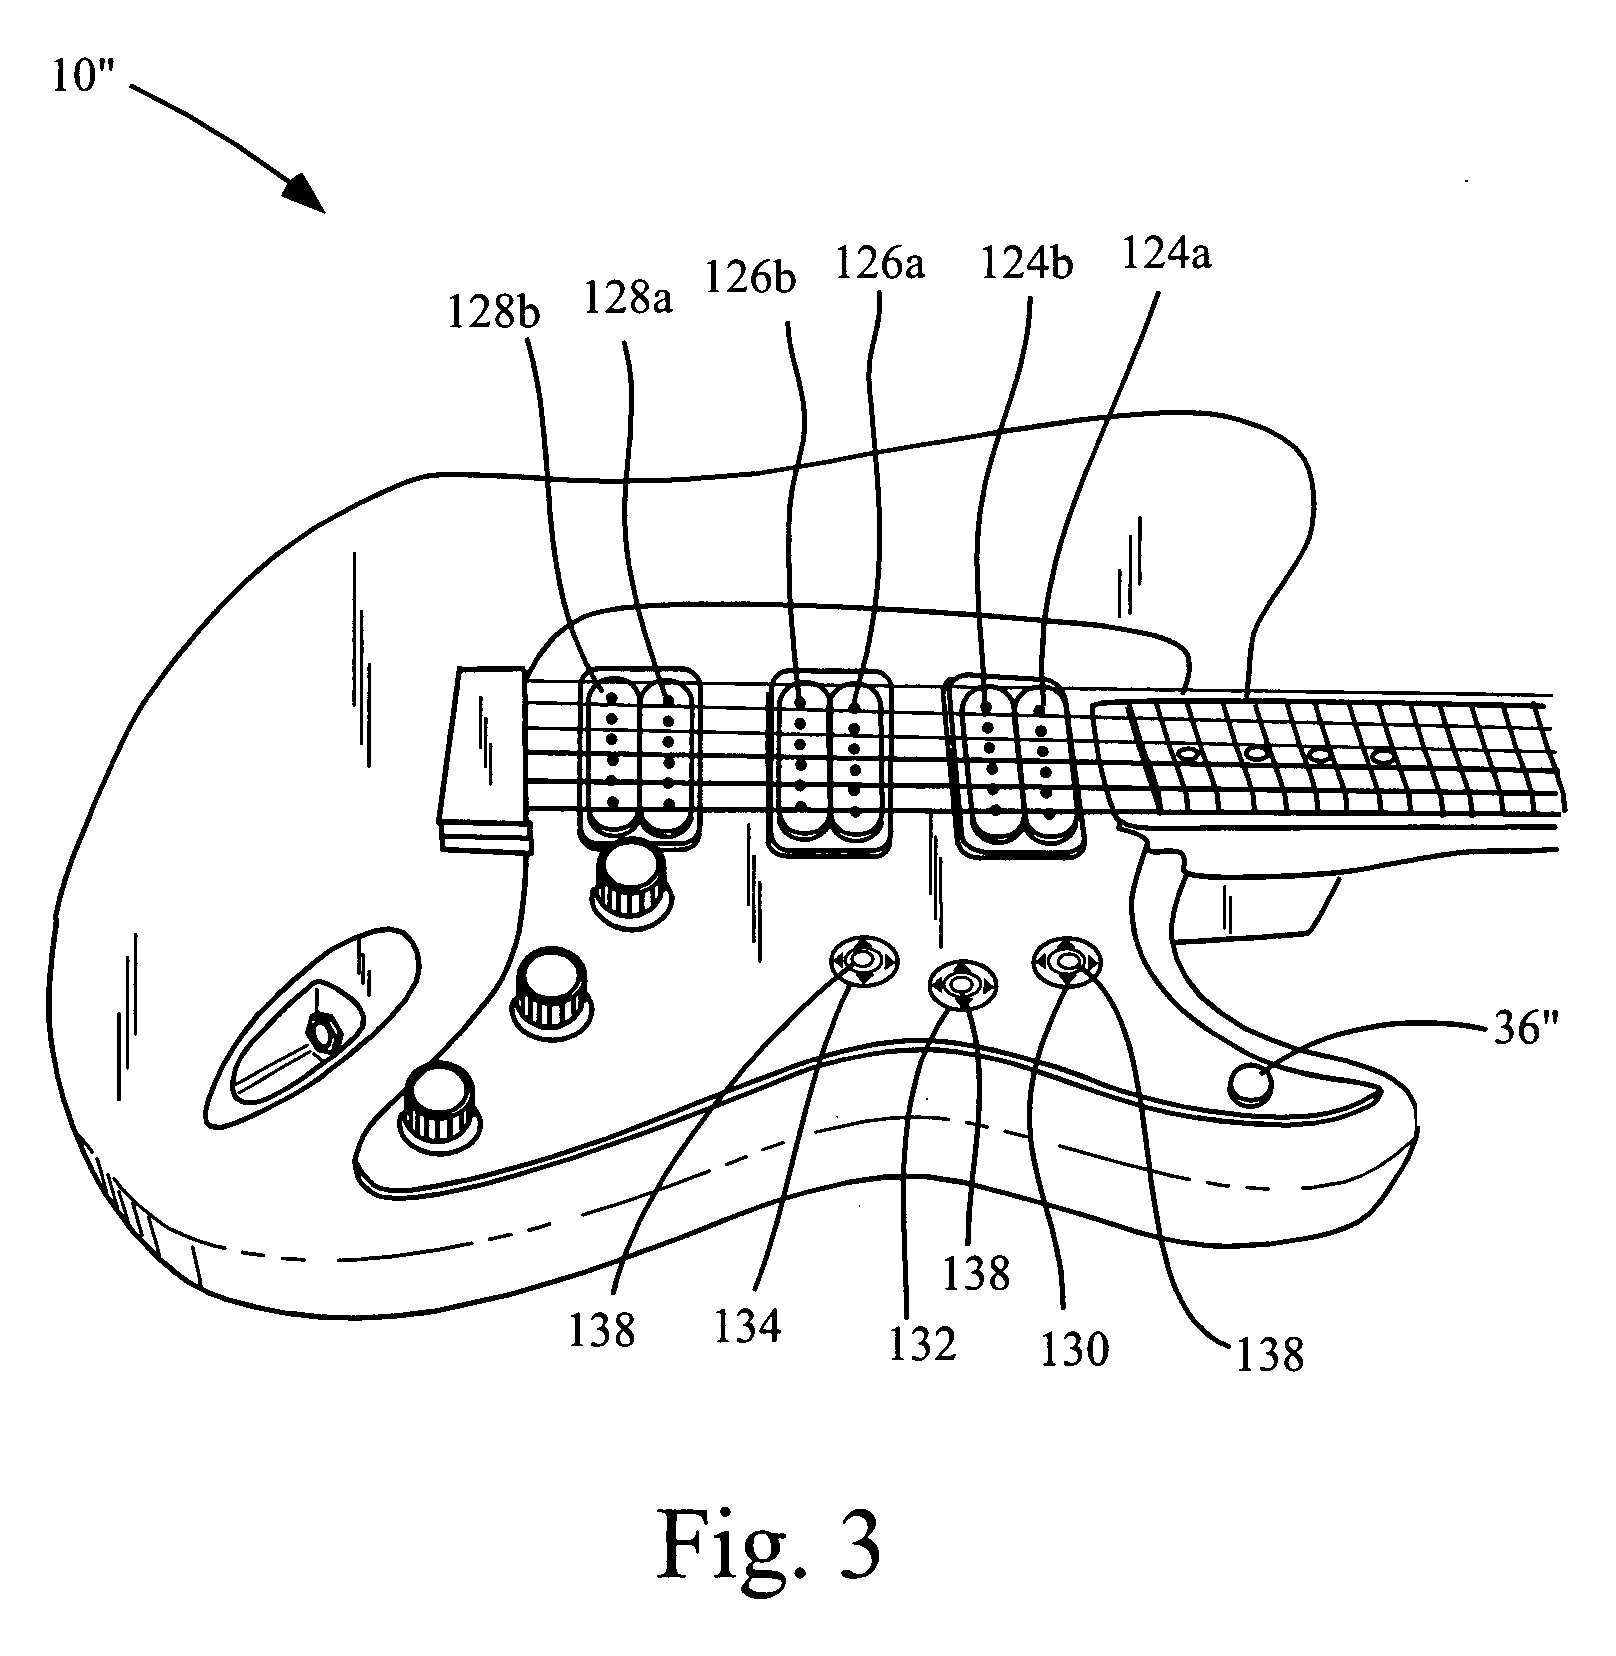 Electrical musical instrument with user interface and status display